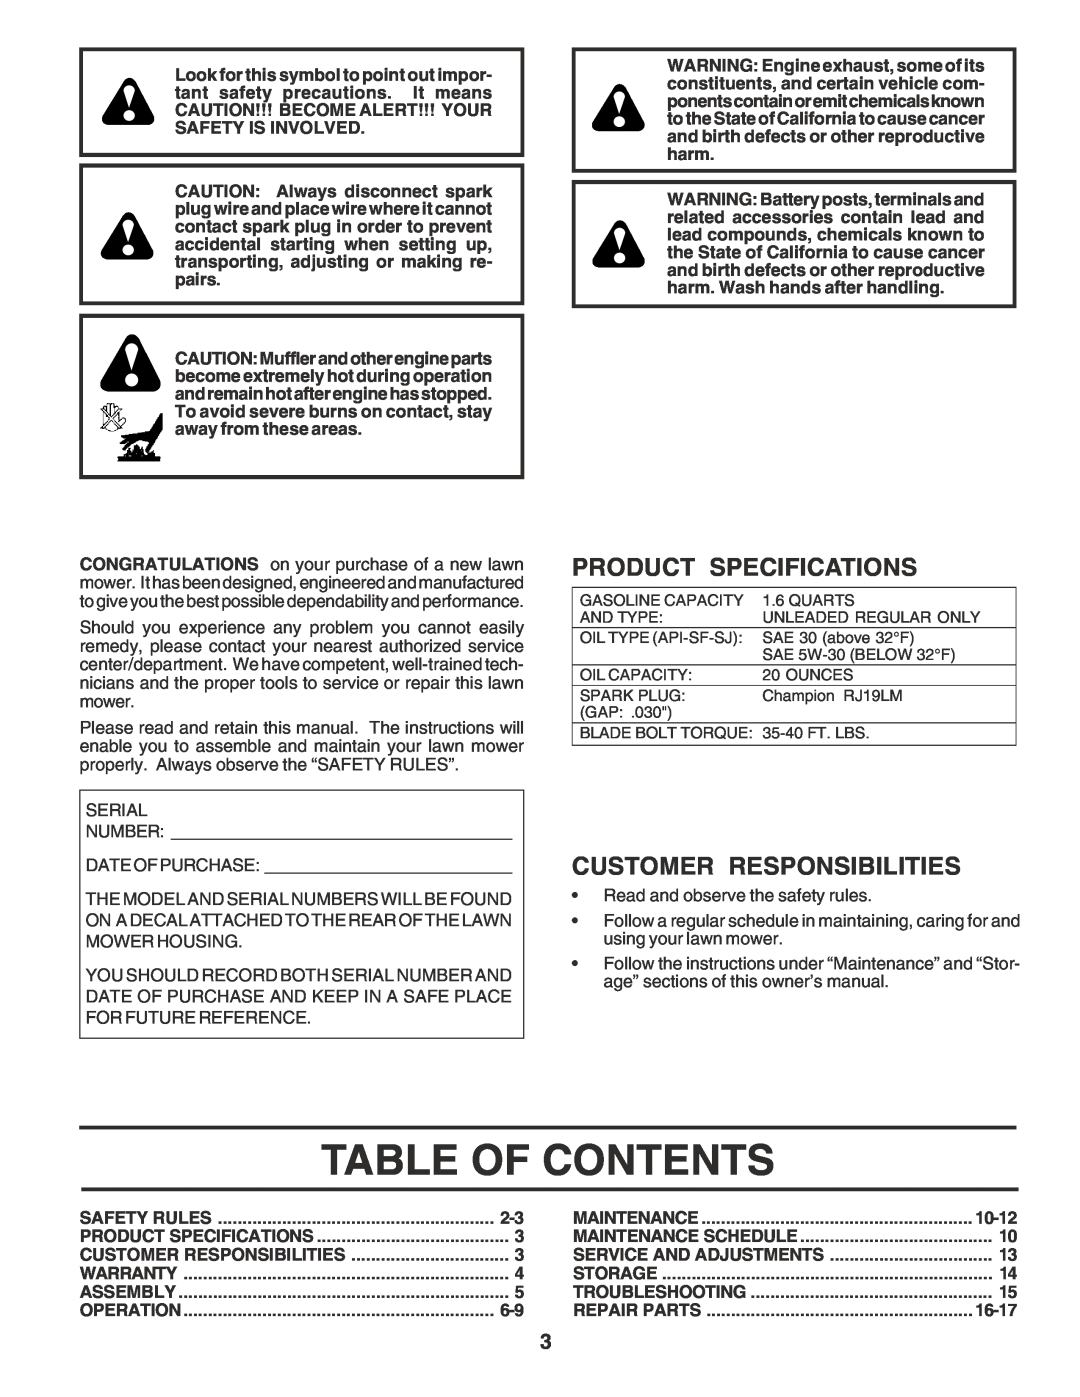 Husqvarna 6022SH owner manual Table Of Contents, Product Specifications, Customer Responsibilities 